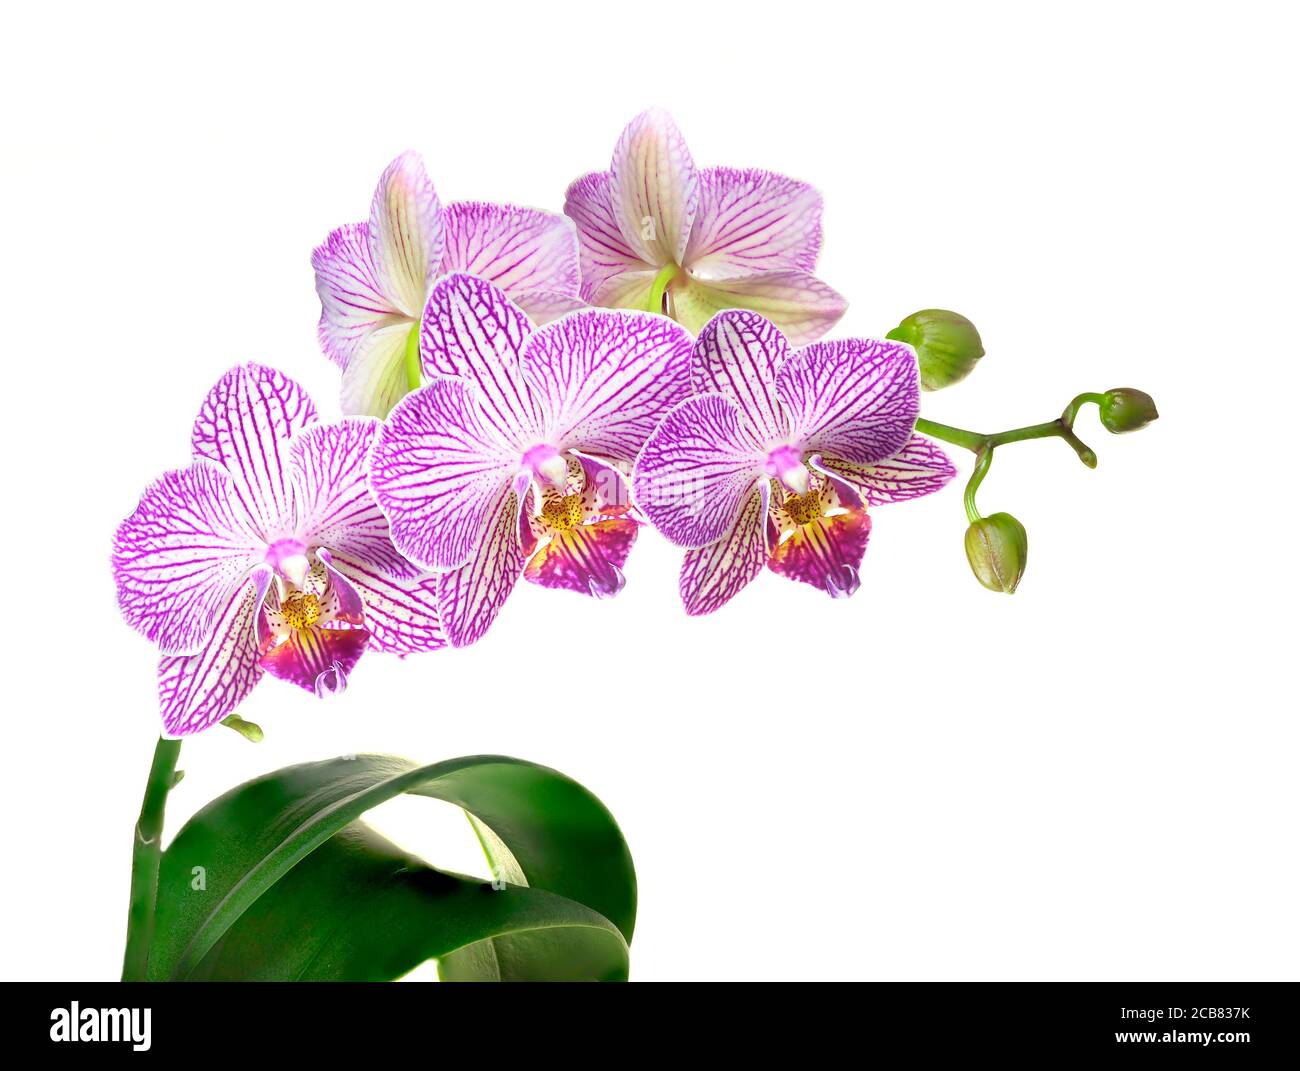 Focus Stacked Closeup Image of a Purple and White Orchid Isolated on White Stock Photo